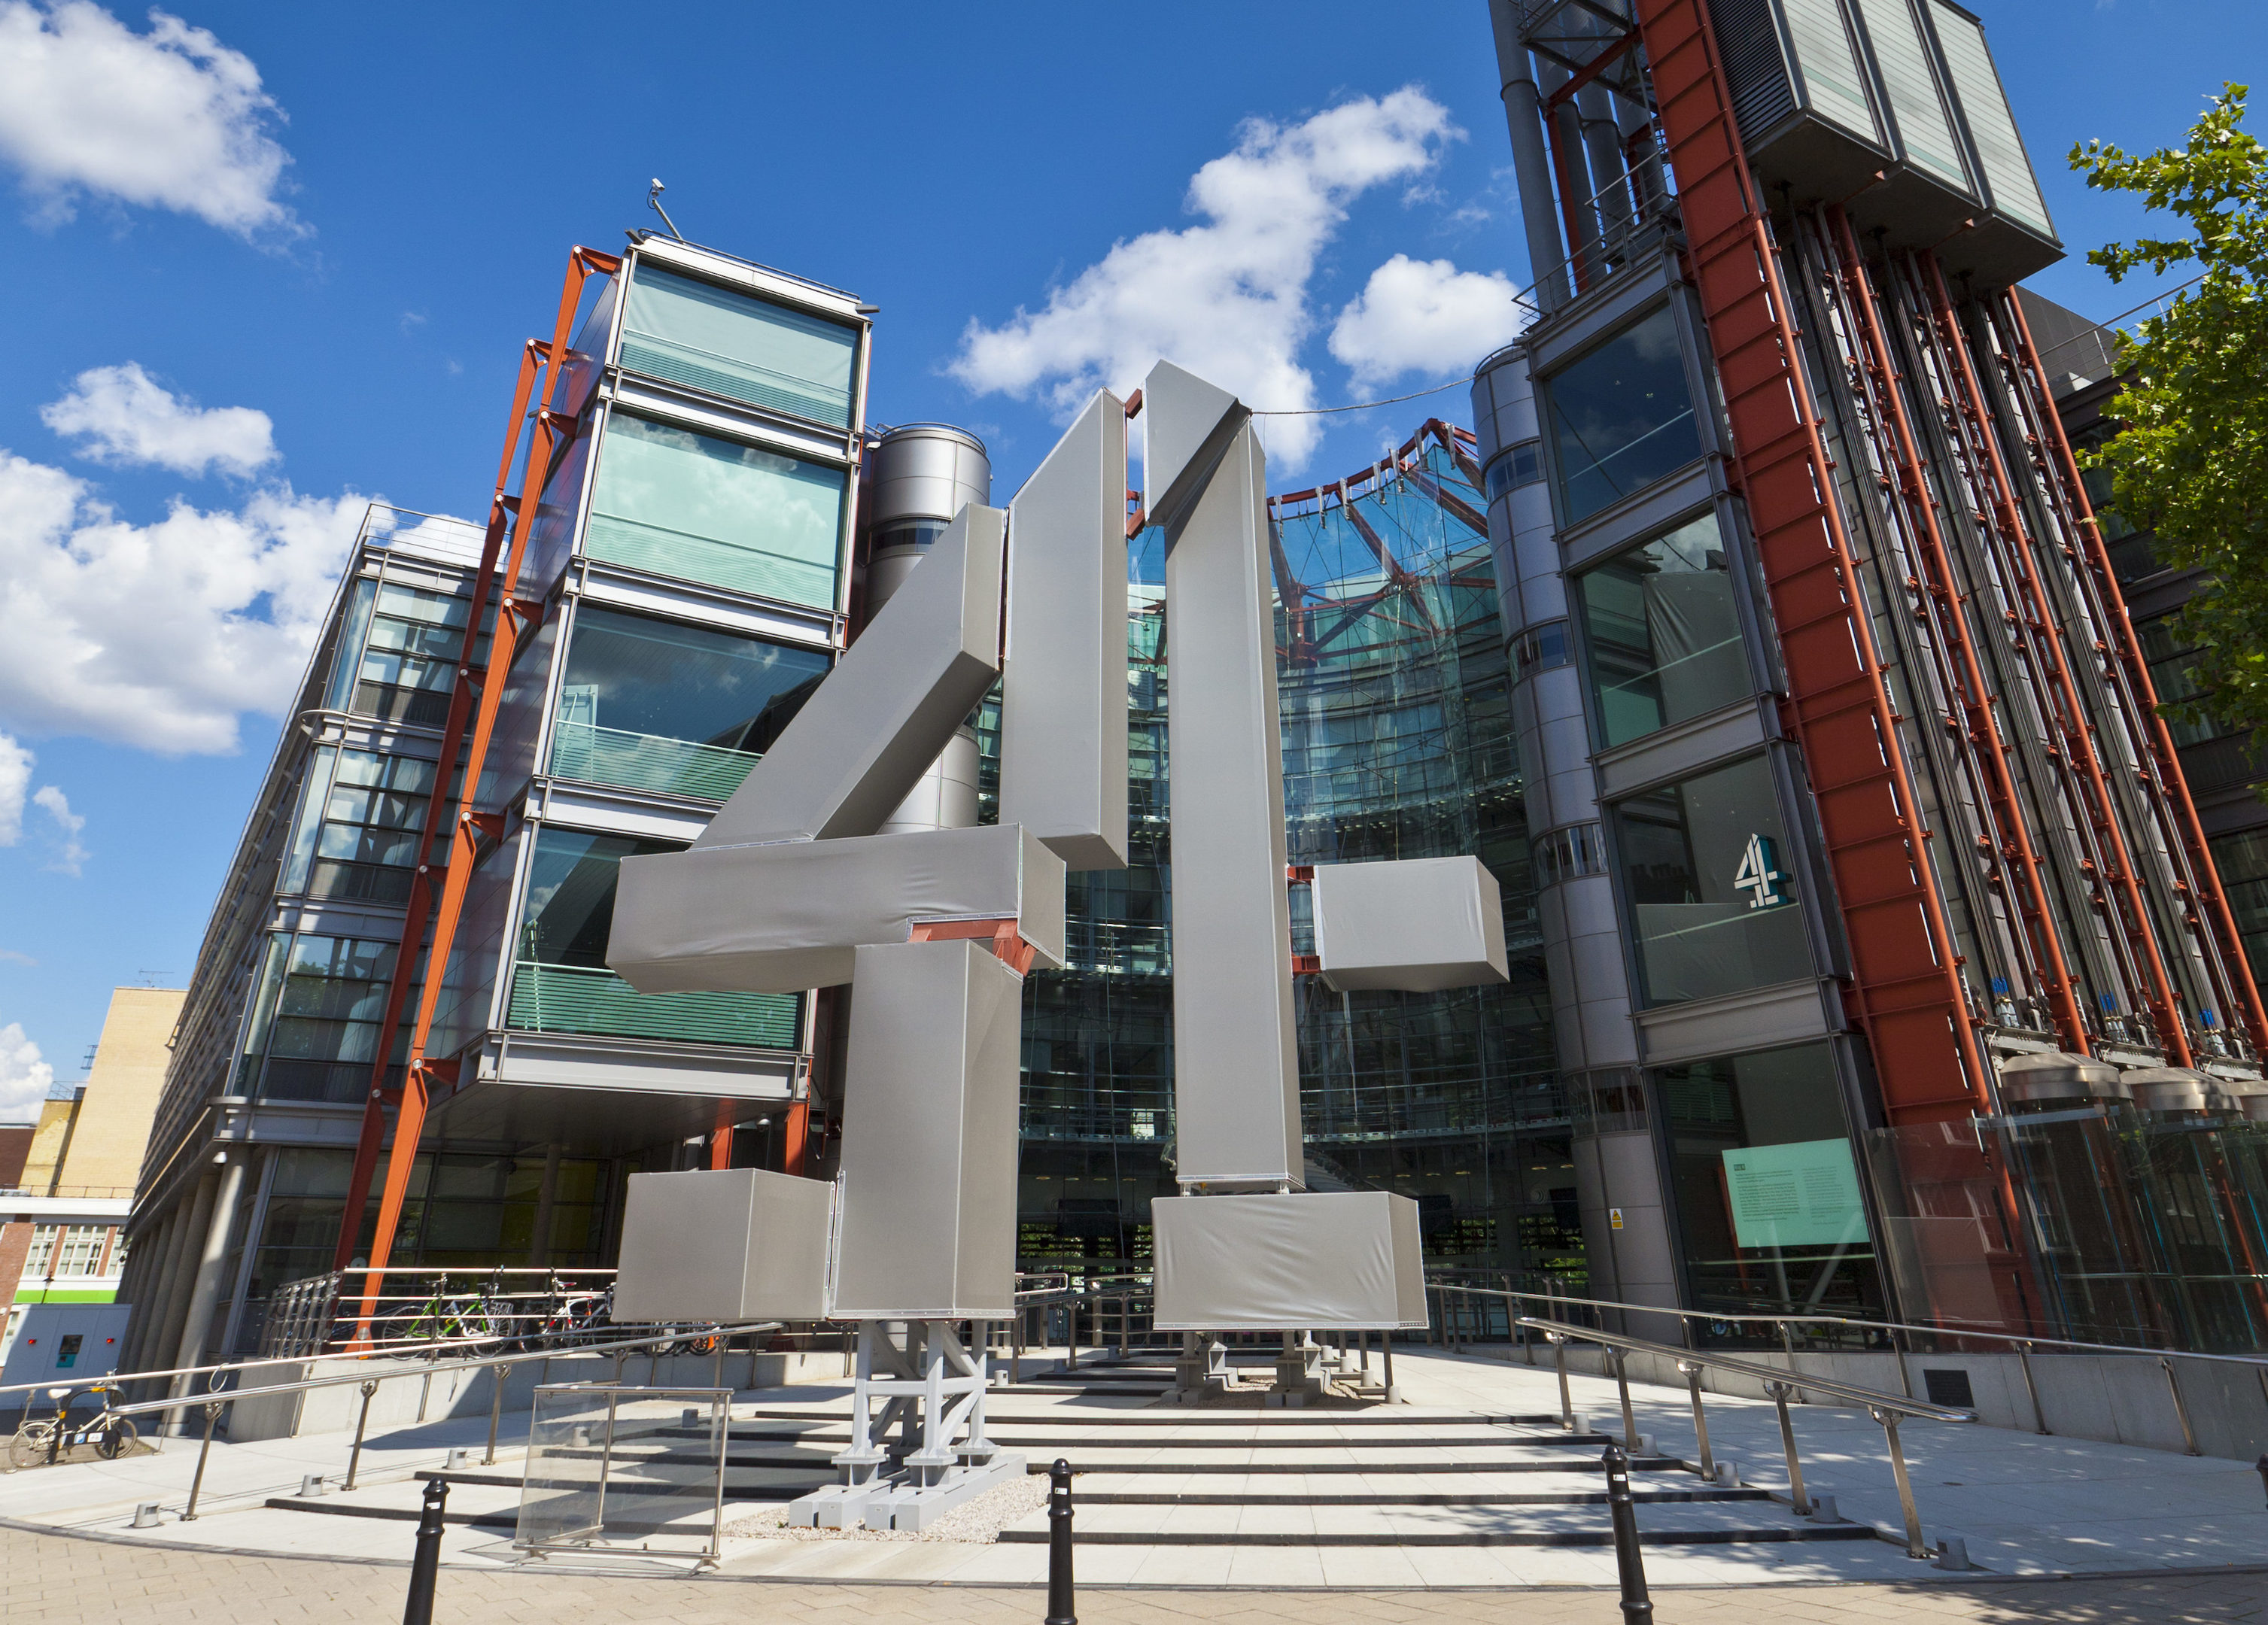 Channel Four Headquarters in London (Getty Images/iStock)